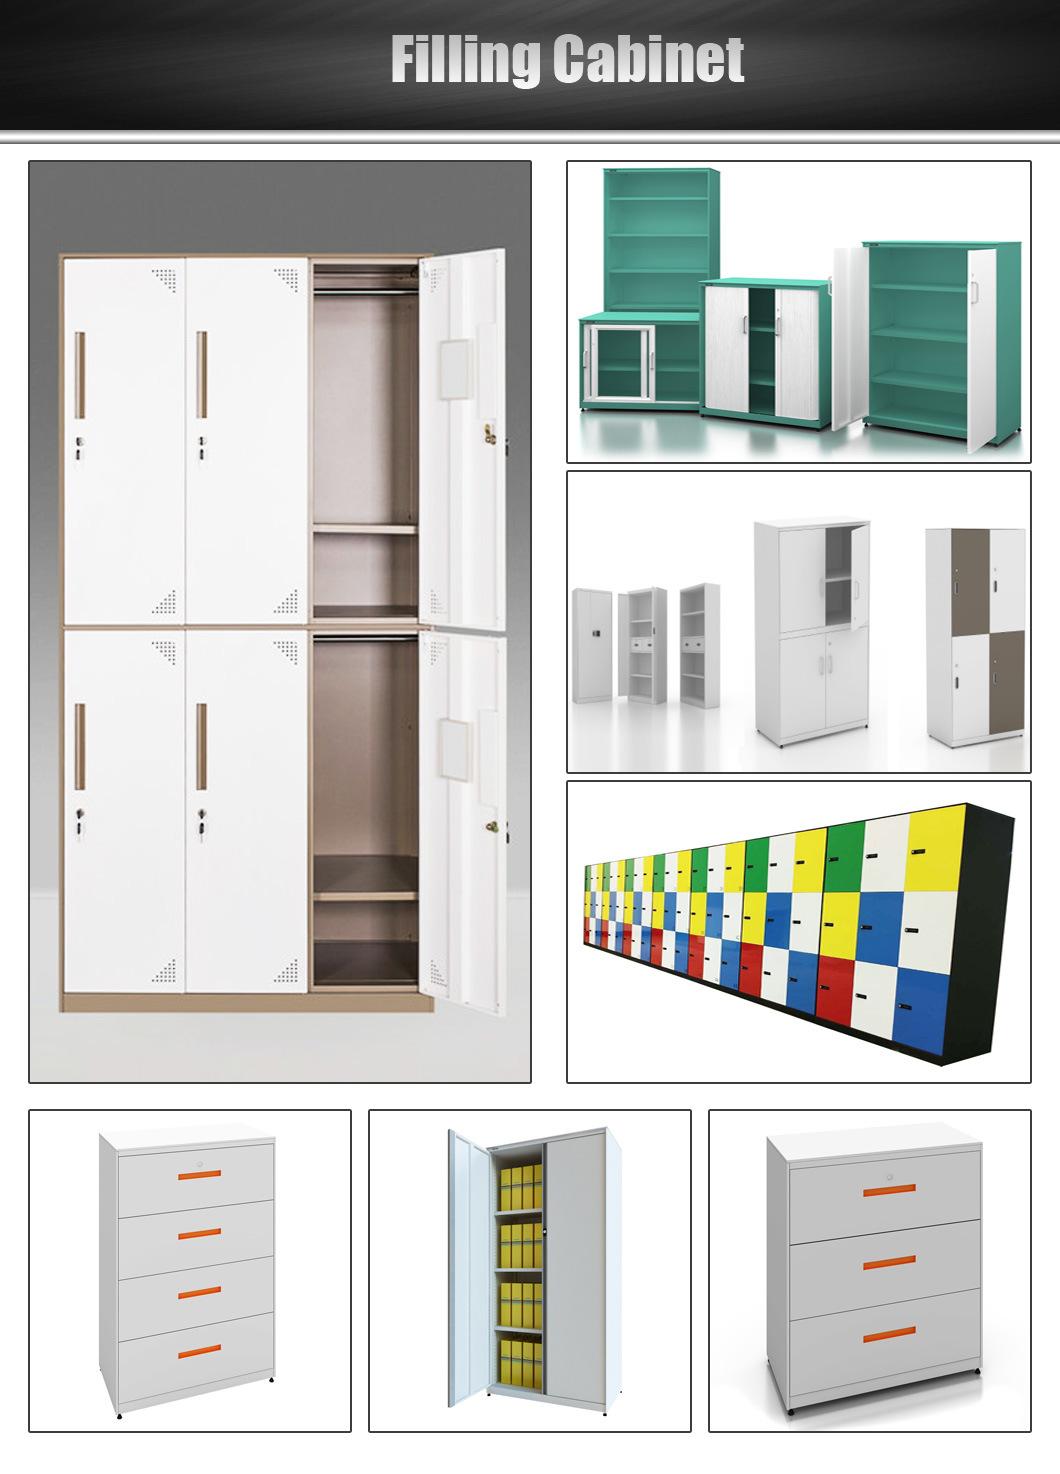 Strong Packing Work Storage Cabinets with Environmentally-Friendly Materials